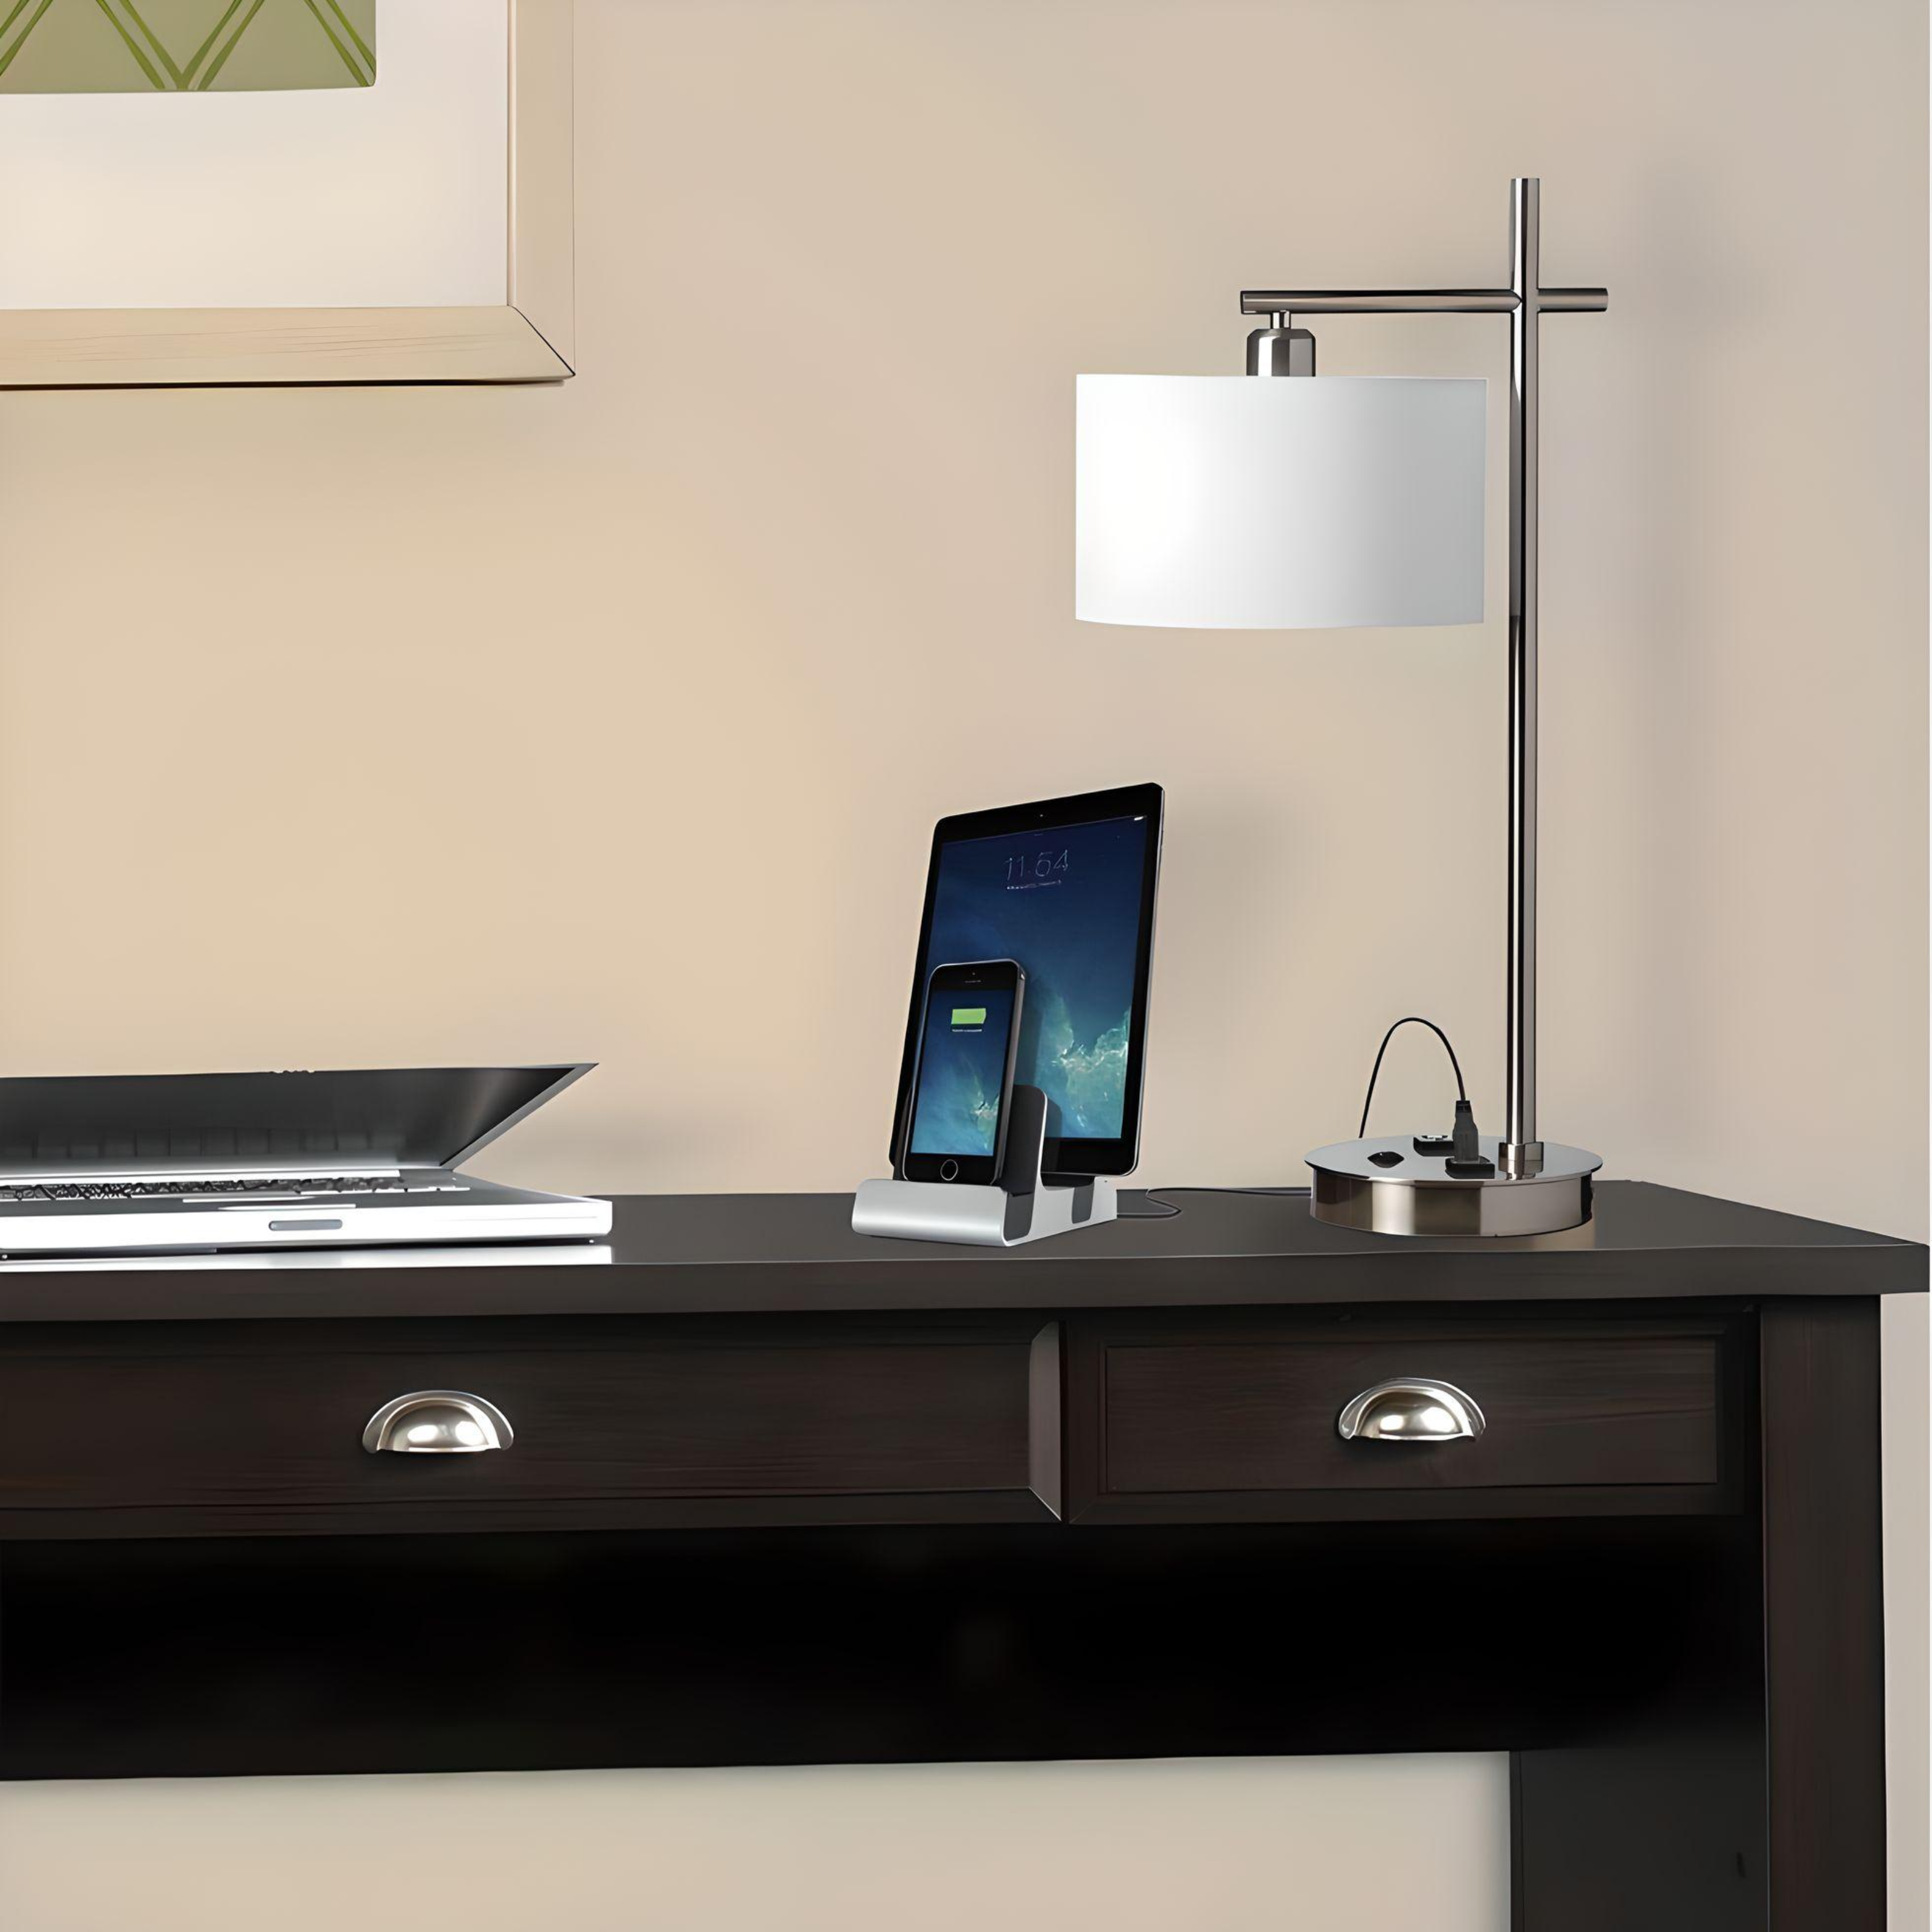 Astra Desk Table Lamps- Desk Table Lamps with brushed nickel finish and one convenience outlet - Eco LED Lightings 